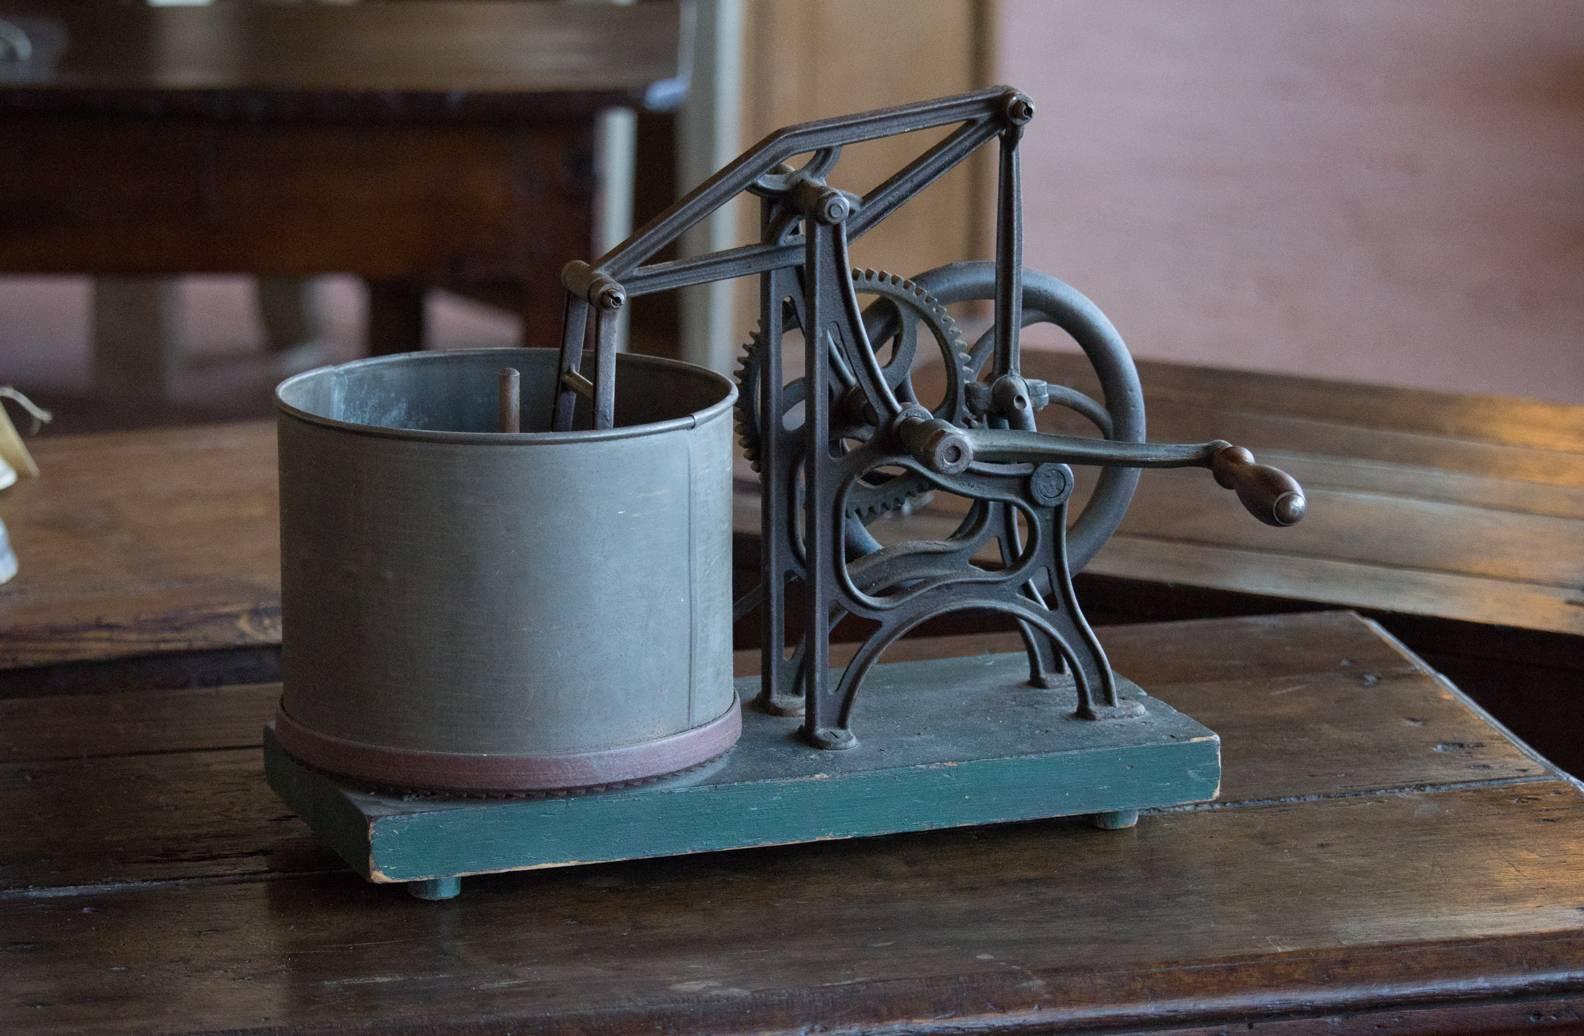 Late 19th century L.S. Starrett's mechanical food chopper with its original green paint, tin basin and wooden handle. The chopper was manufactured in Athol, MA.
 